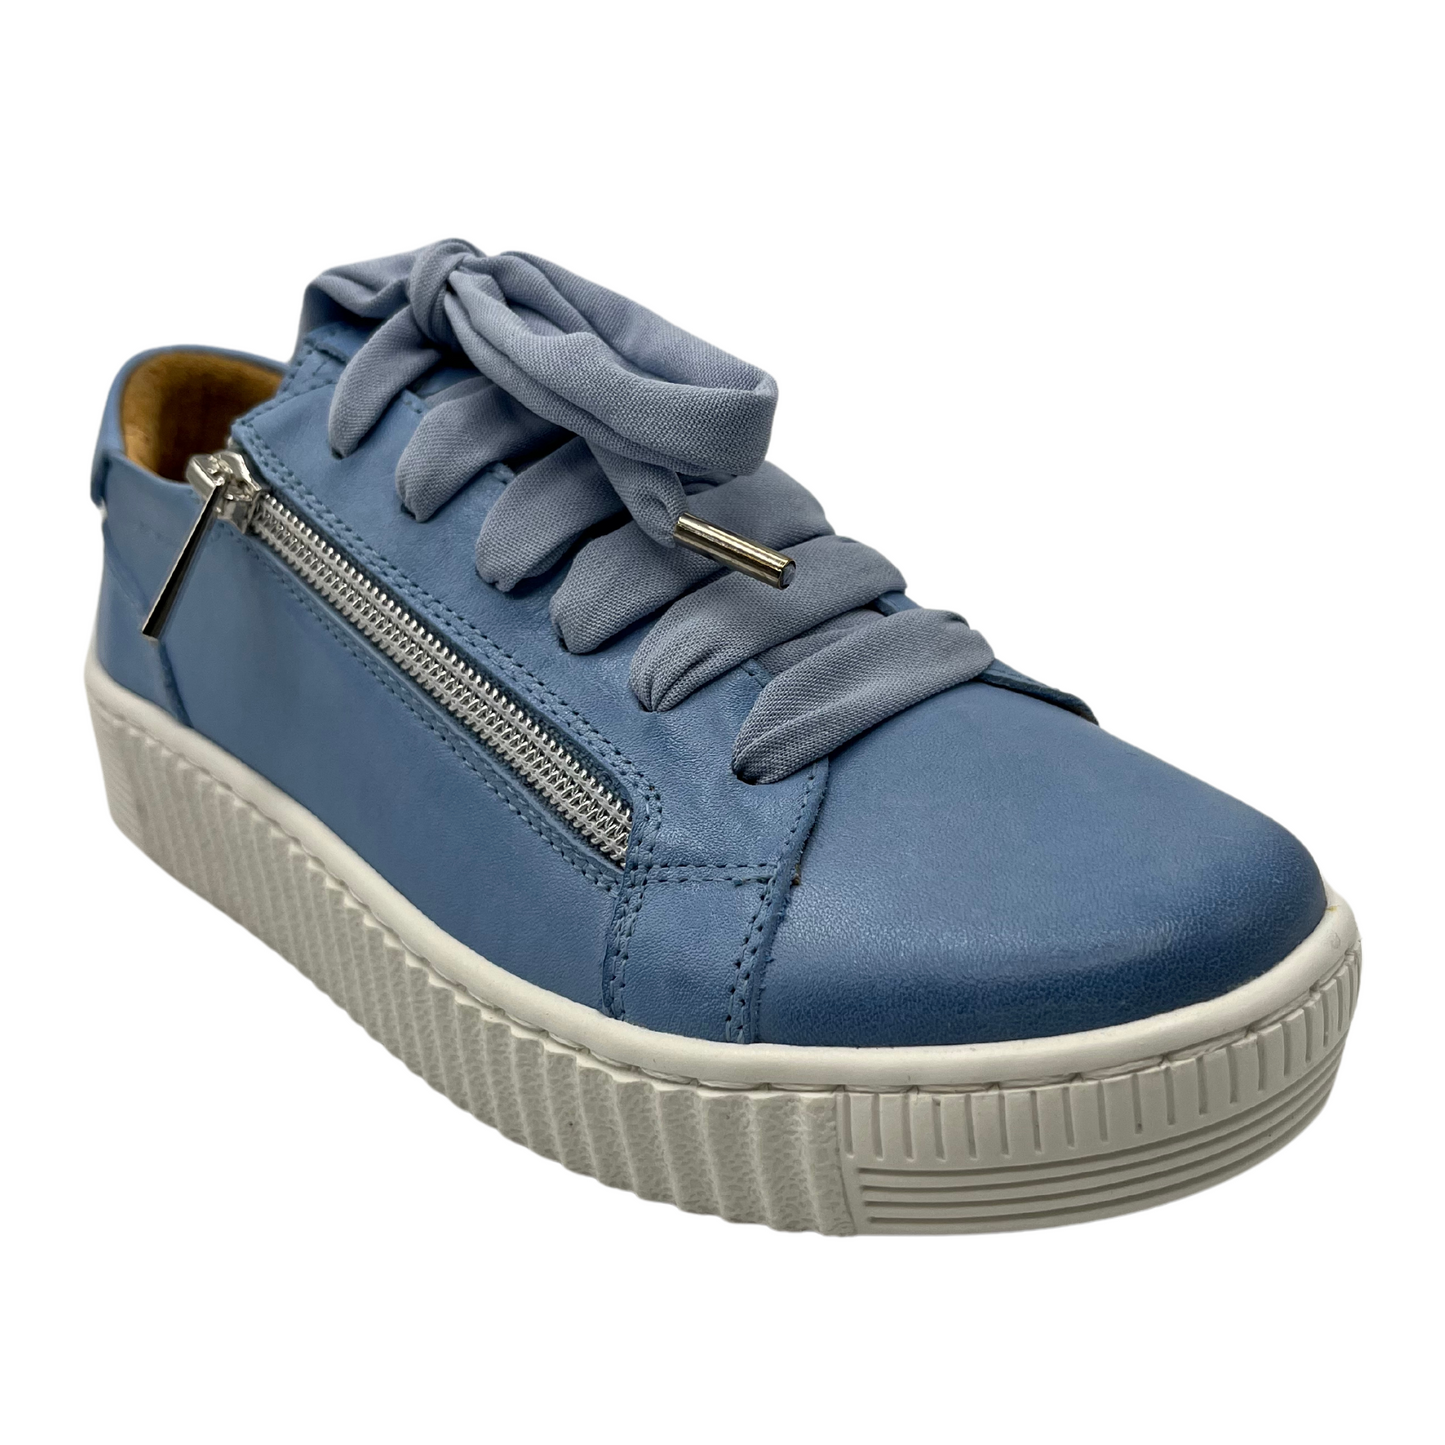 45 degree angled view of blue leather sneaker with matching laces and white rubber outsole